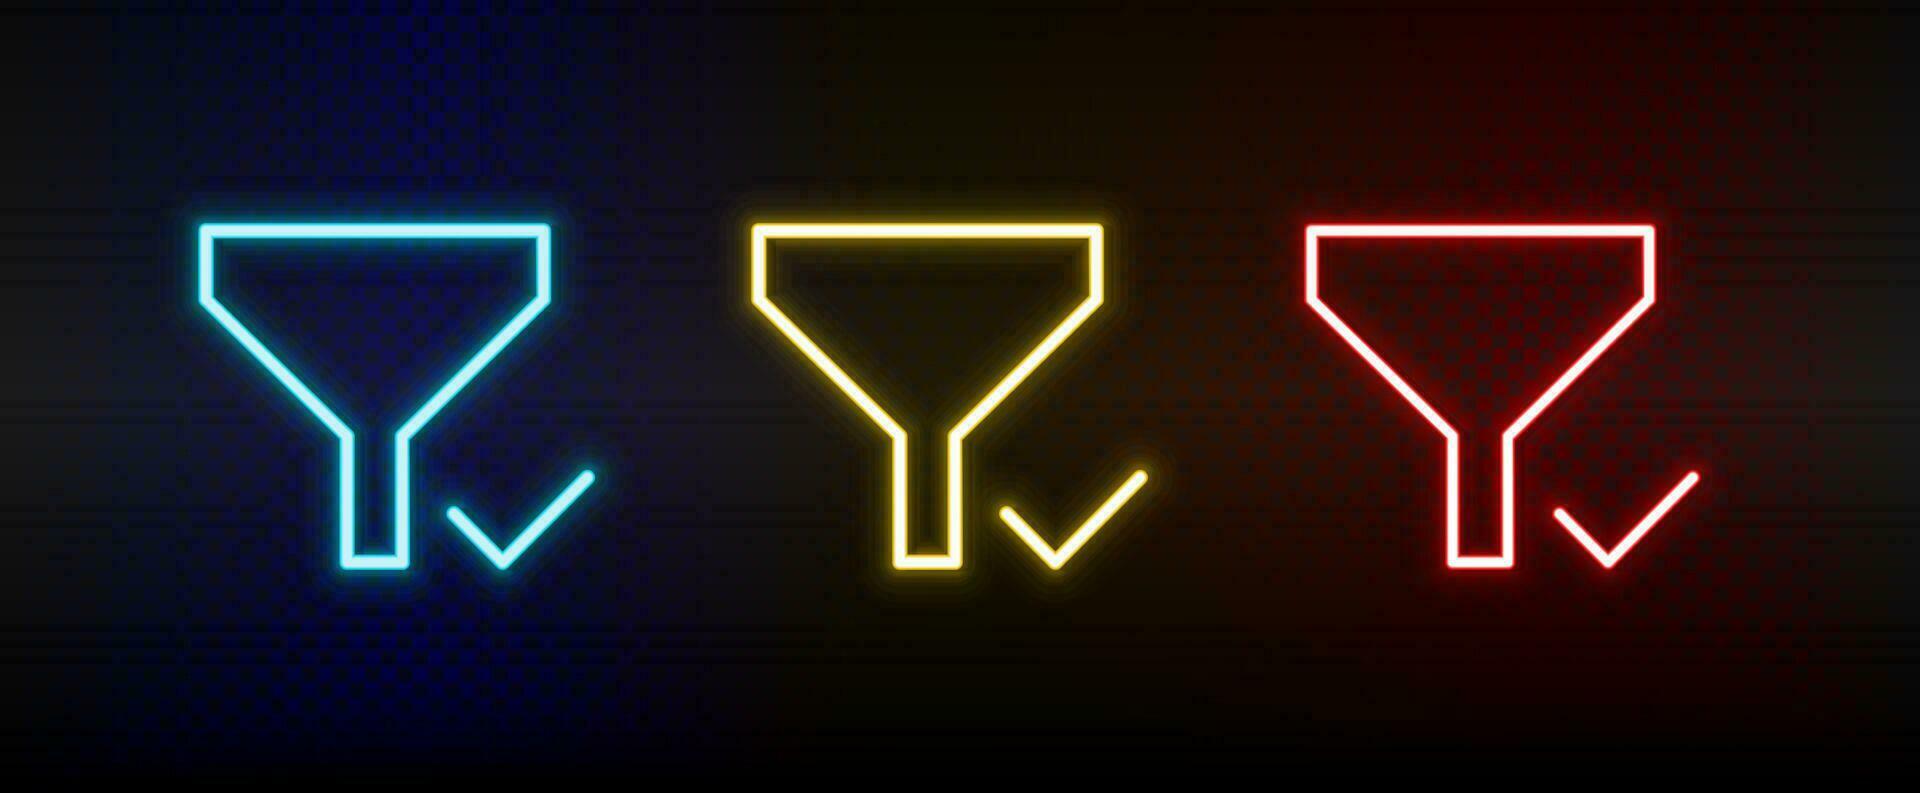 check, filter neon icon set. Set of red, blue, yellow neon vector icon on dark.